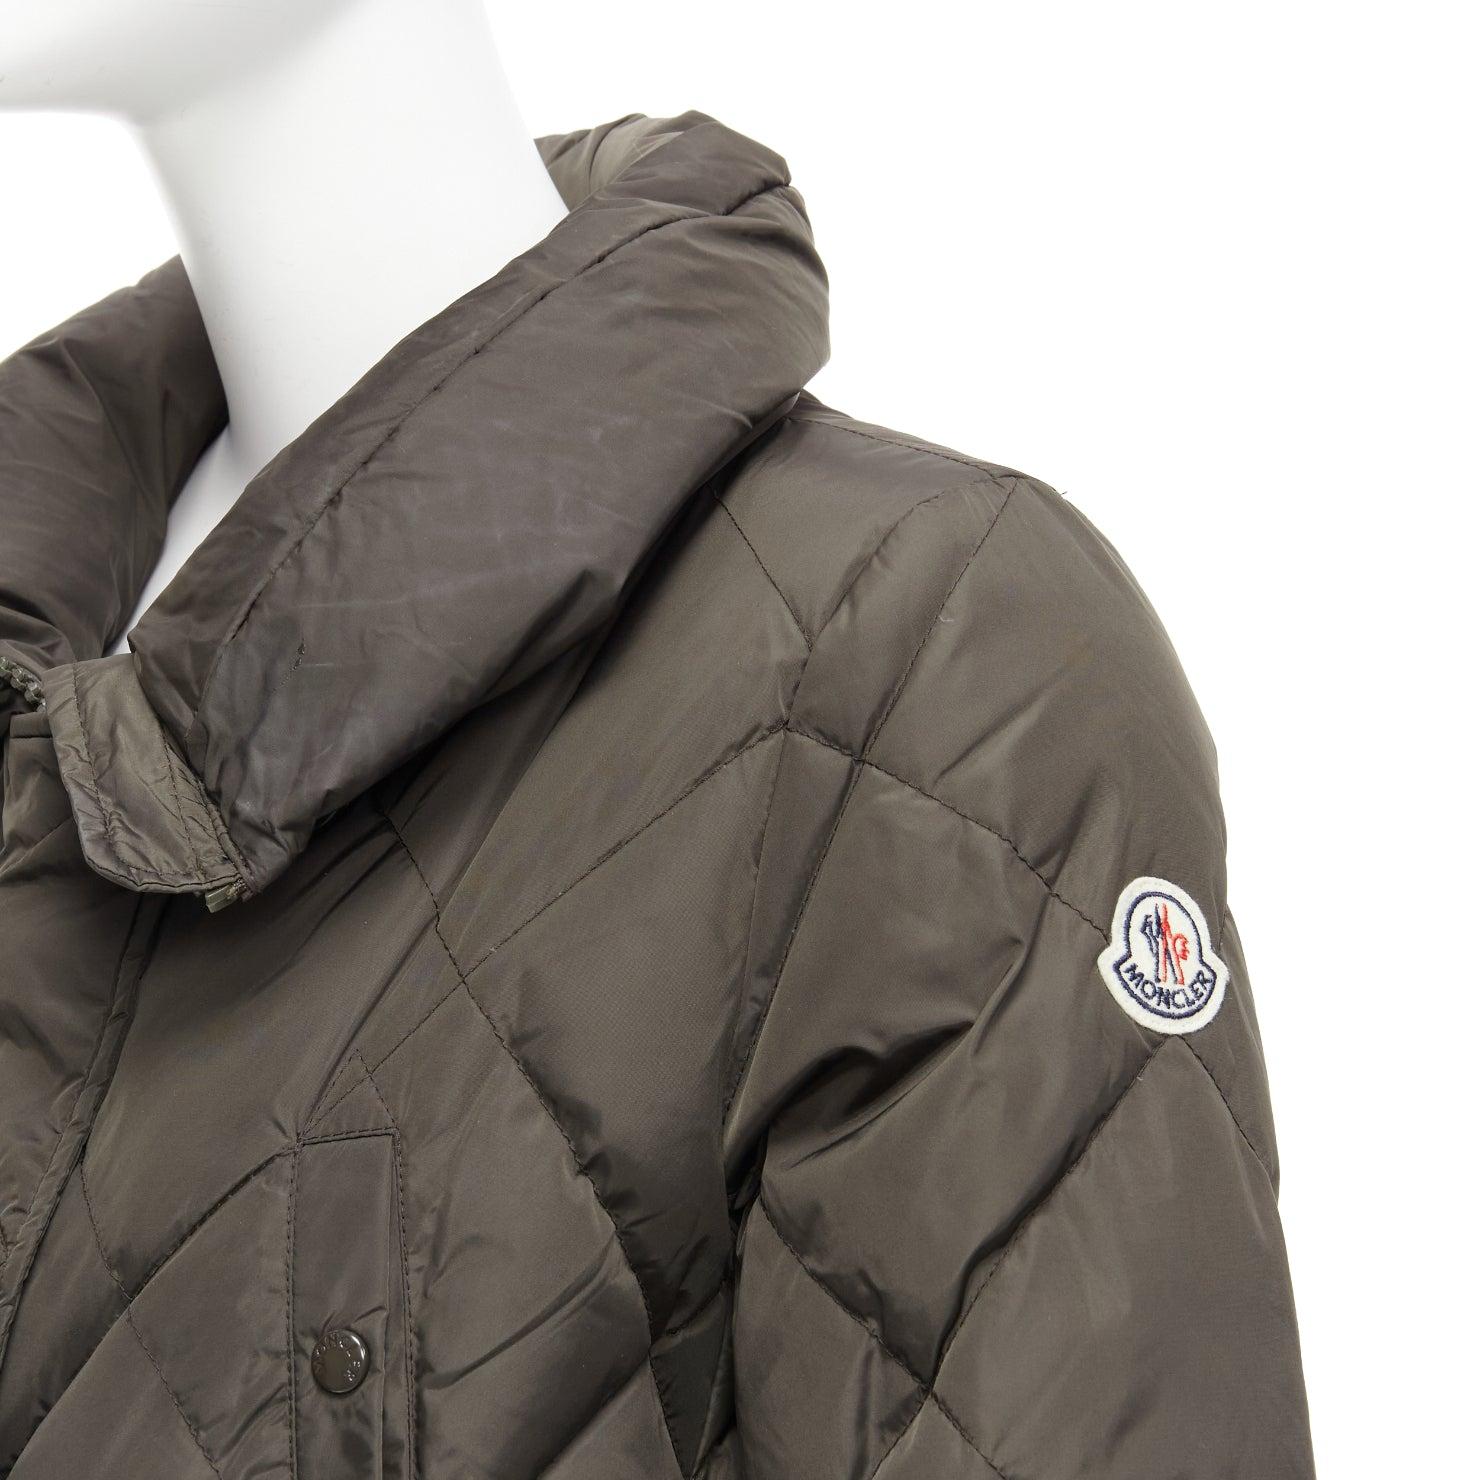 MONCLER Norme Afnor khaki quilted virgin wool blend frill hem coat Sz1 M
Reference: NILI/A00012
Brand: Moncler
Collection: Norme Afnor
Material: Polyamide, Virgin Wool, Blend
Color: Khaki, Brown
Pattern: Solid
Closure: Zip
Lining: Khaki Fabric
Made